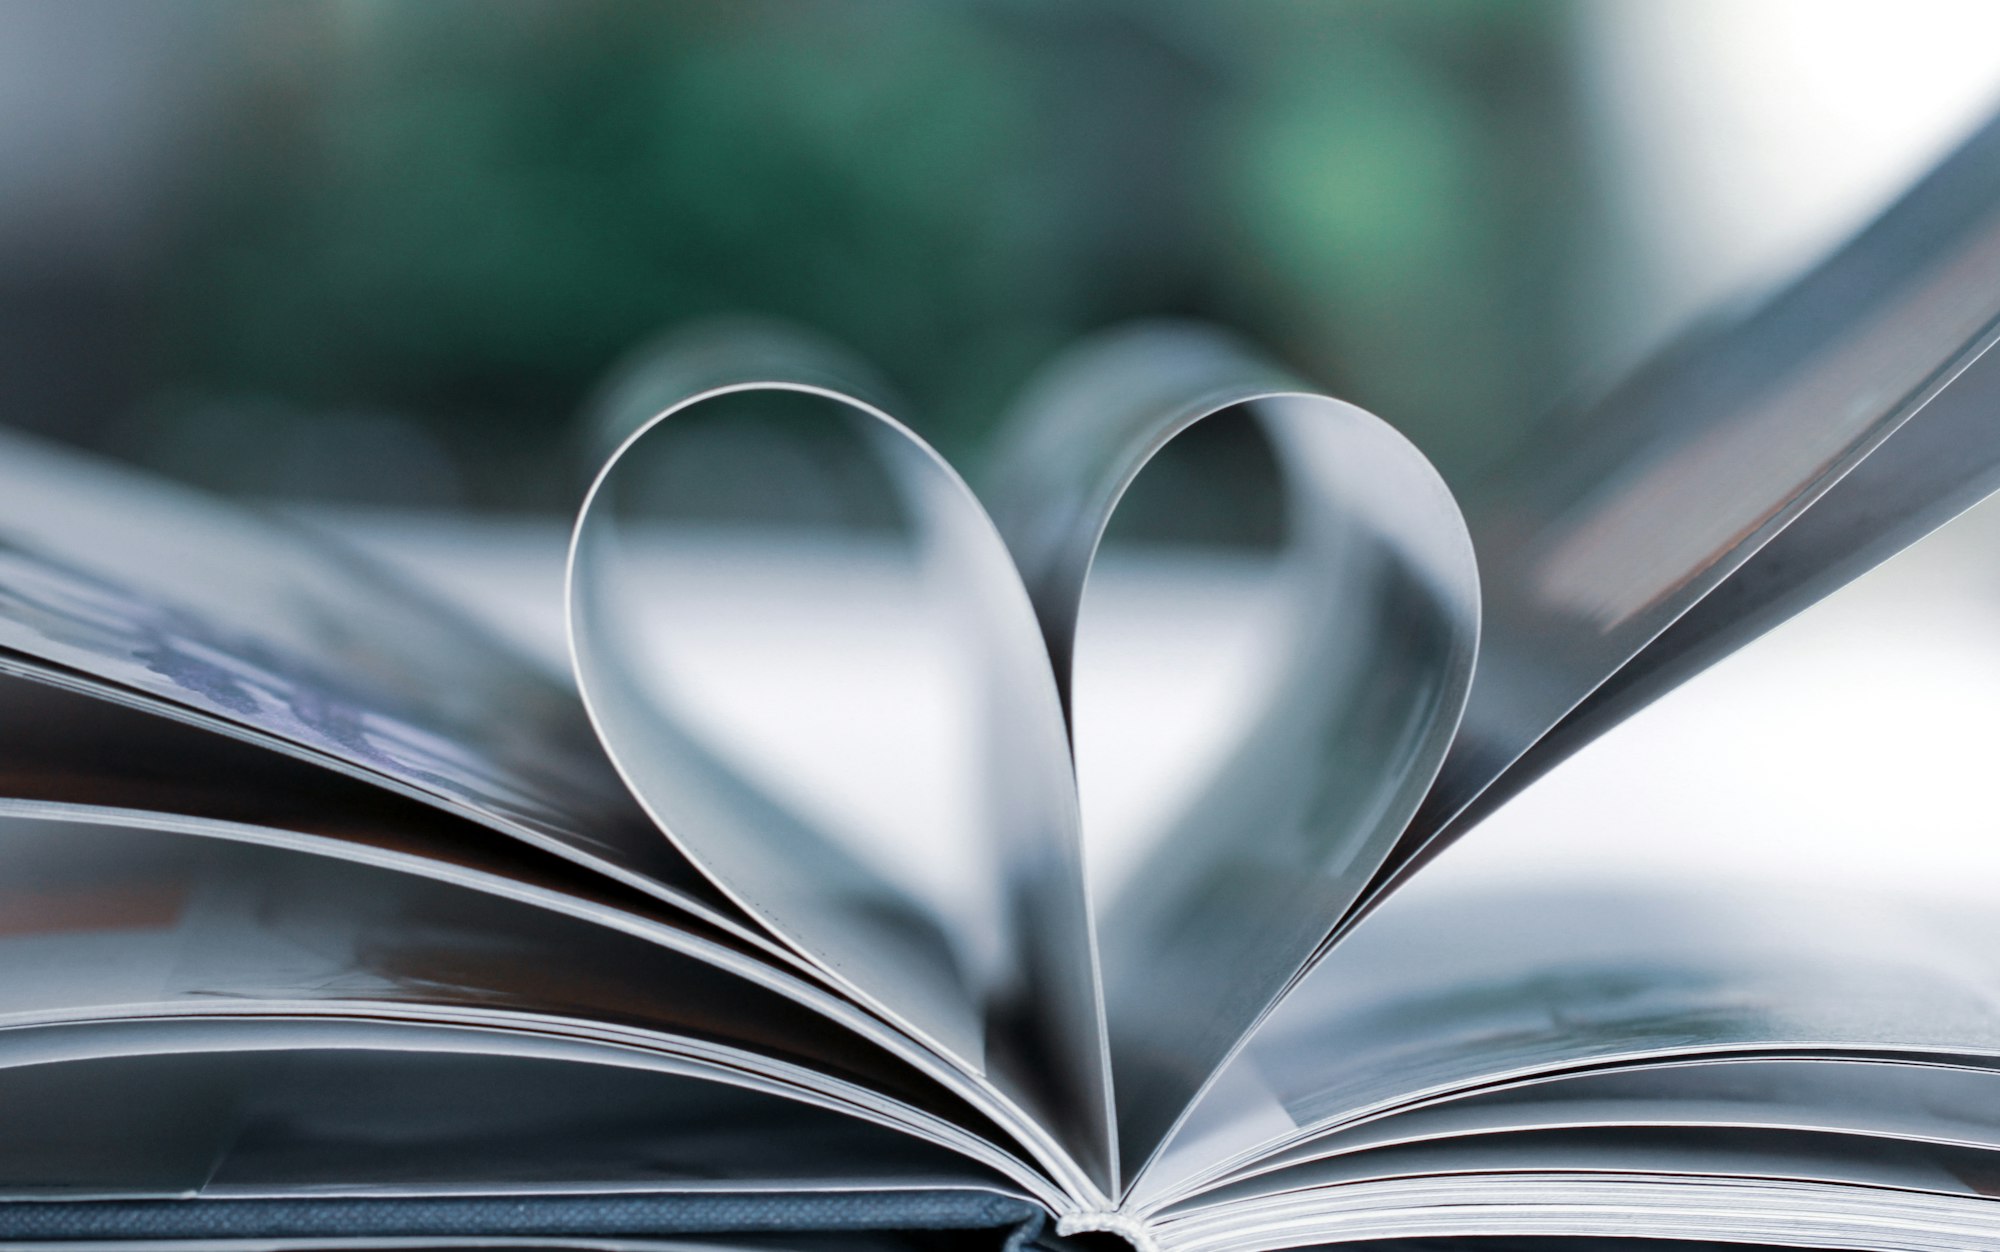 Heart-shaped pages in a book - cool tones